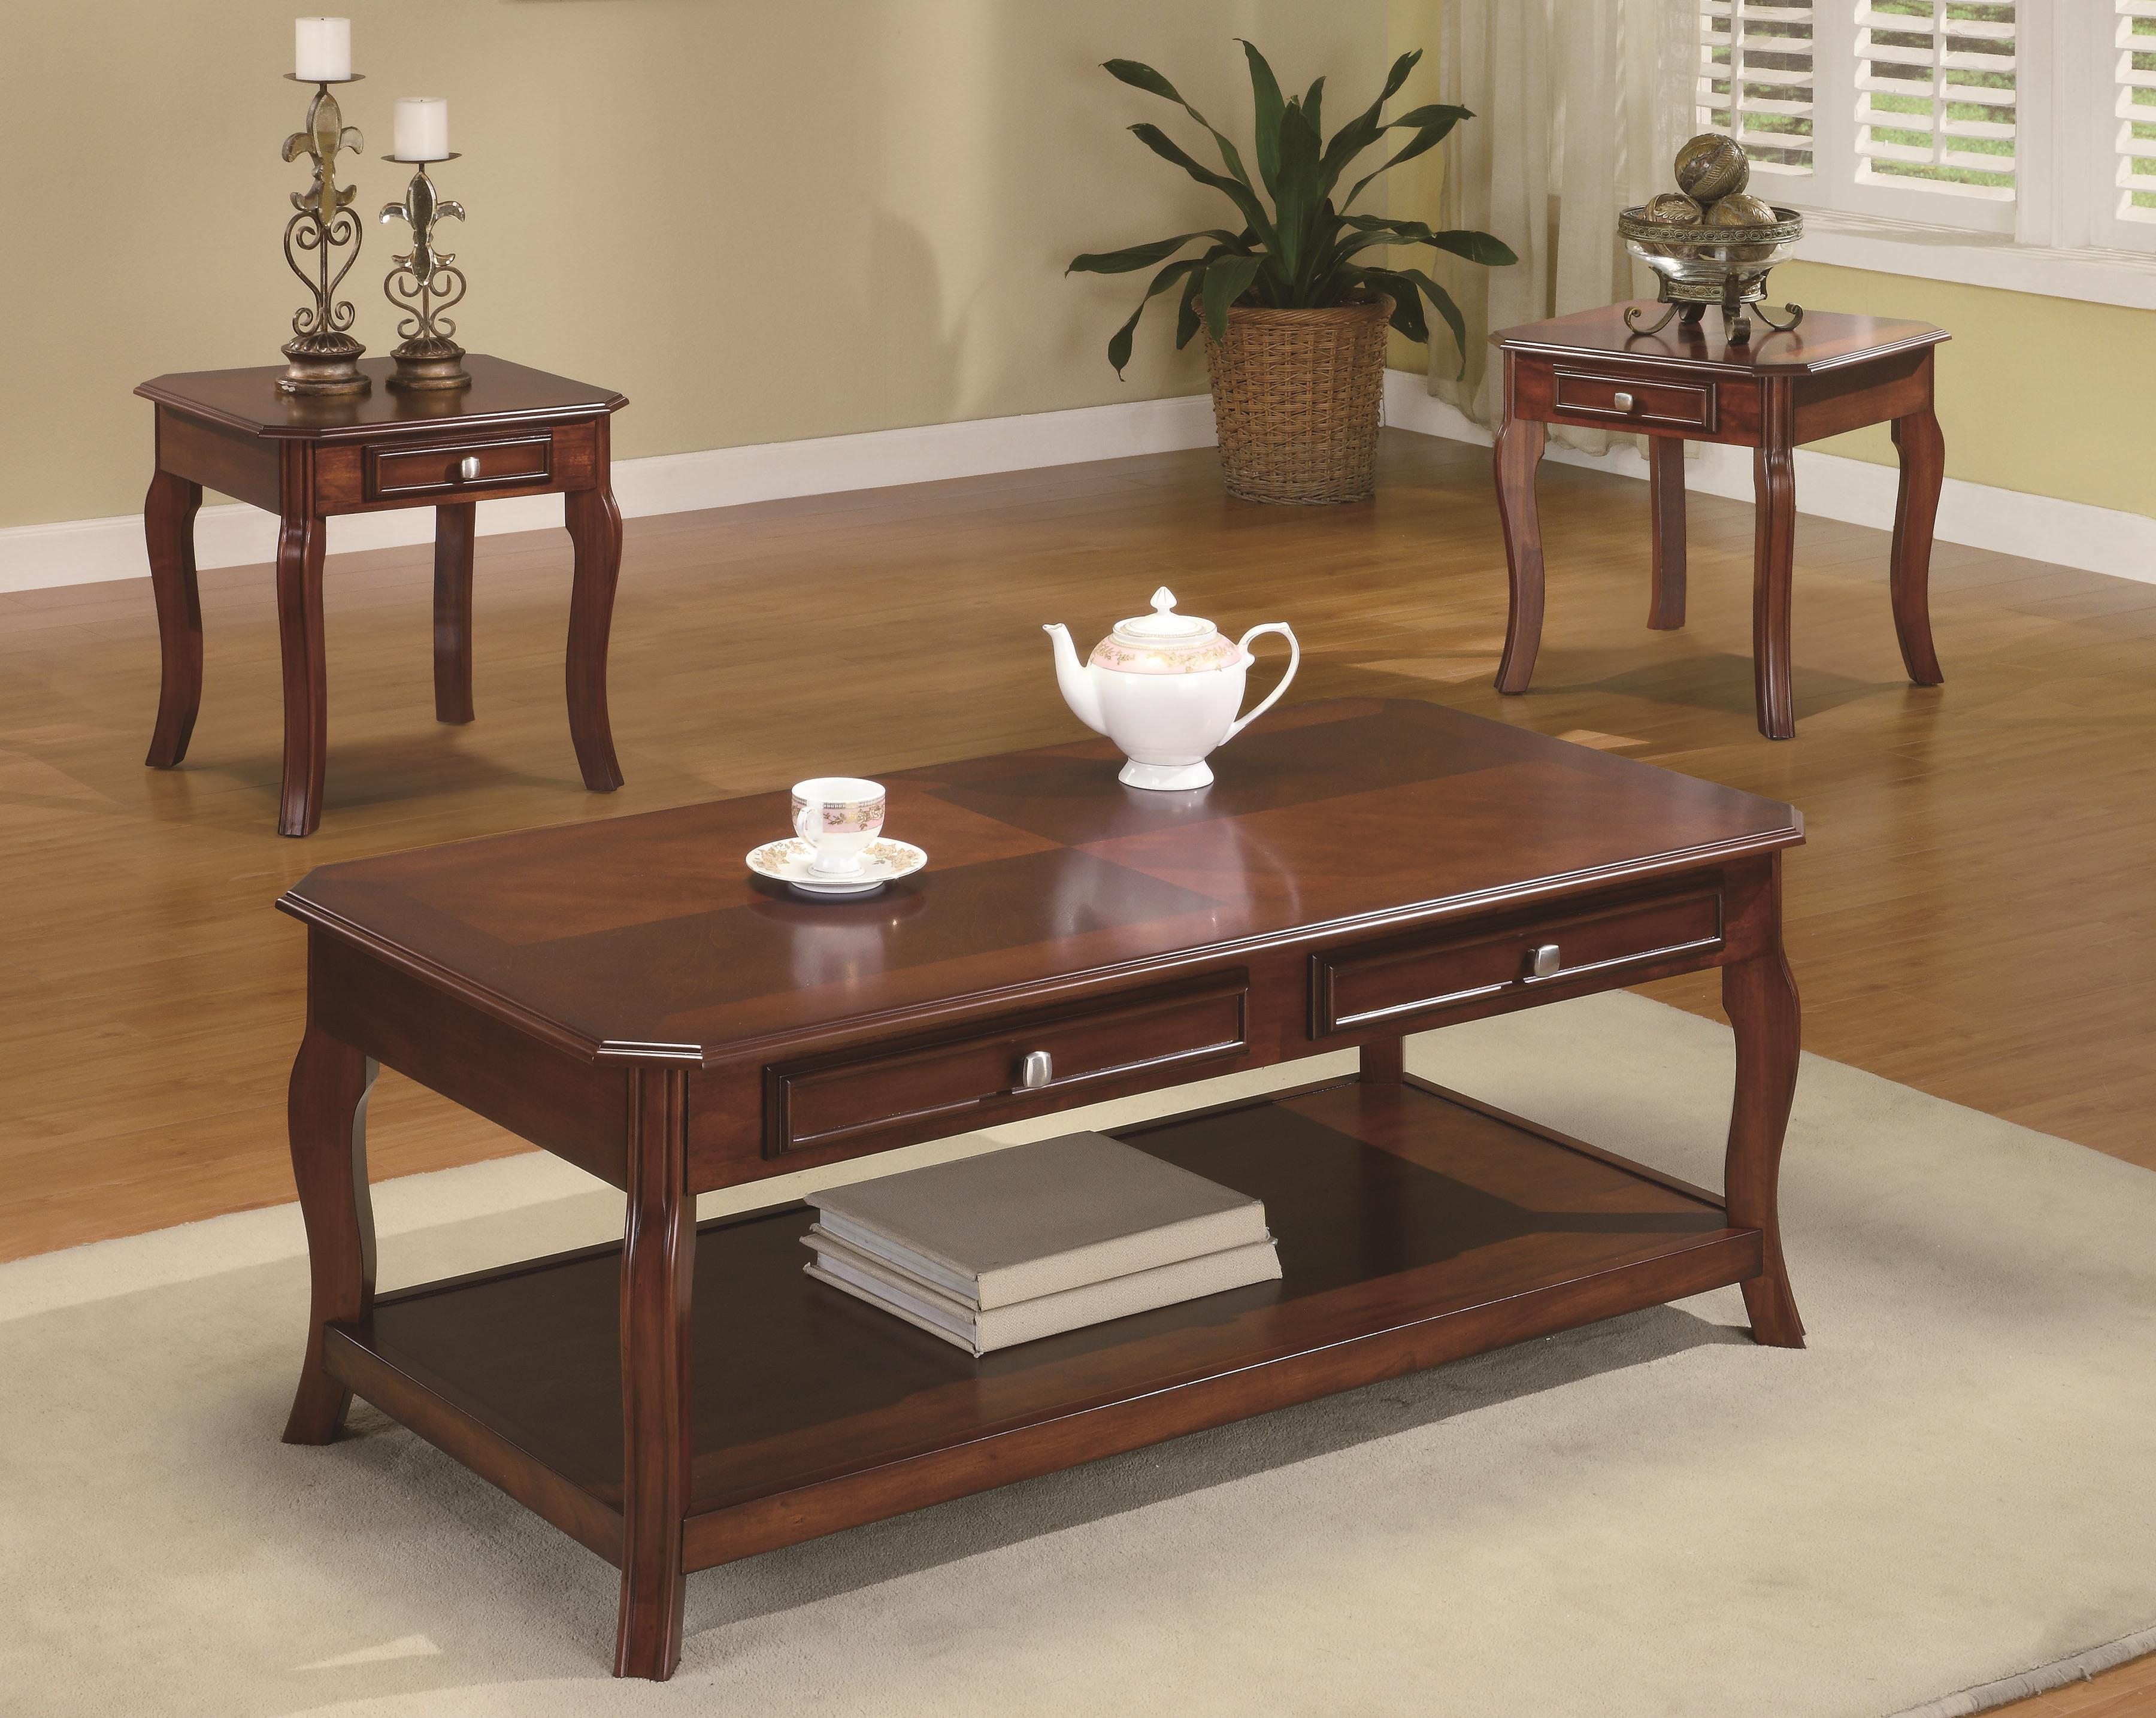 Coffee Tables Table Set With Storage Drawers Co 701508 throughout sizing 3600 X 2869